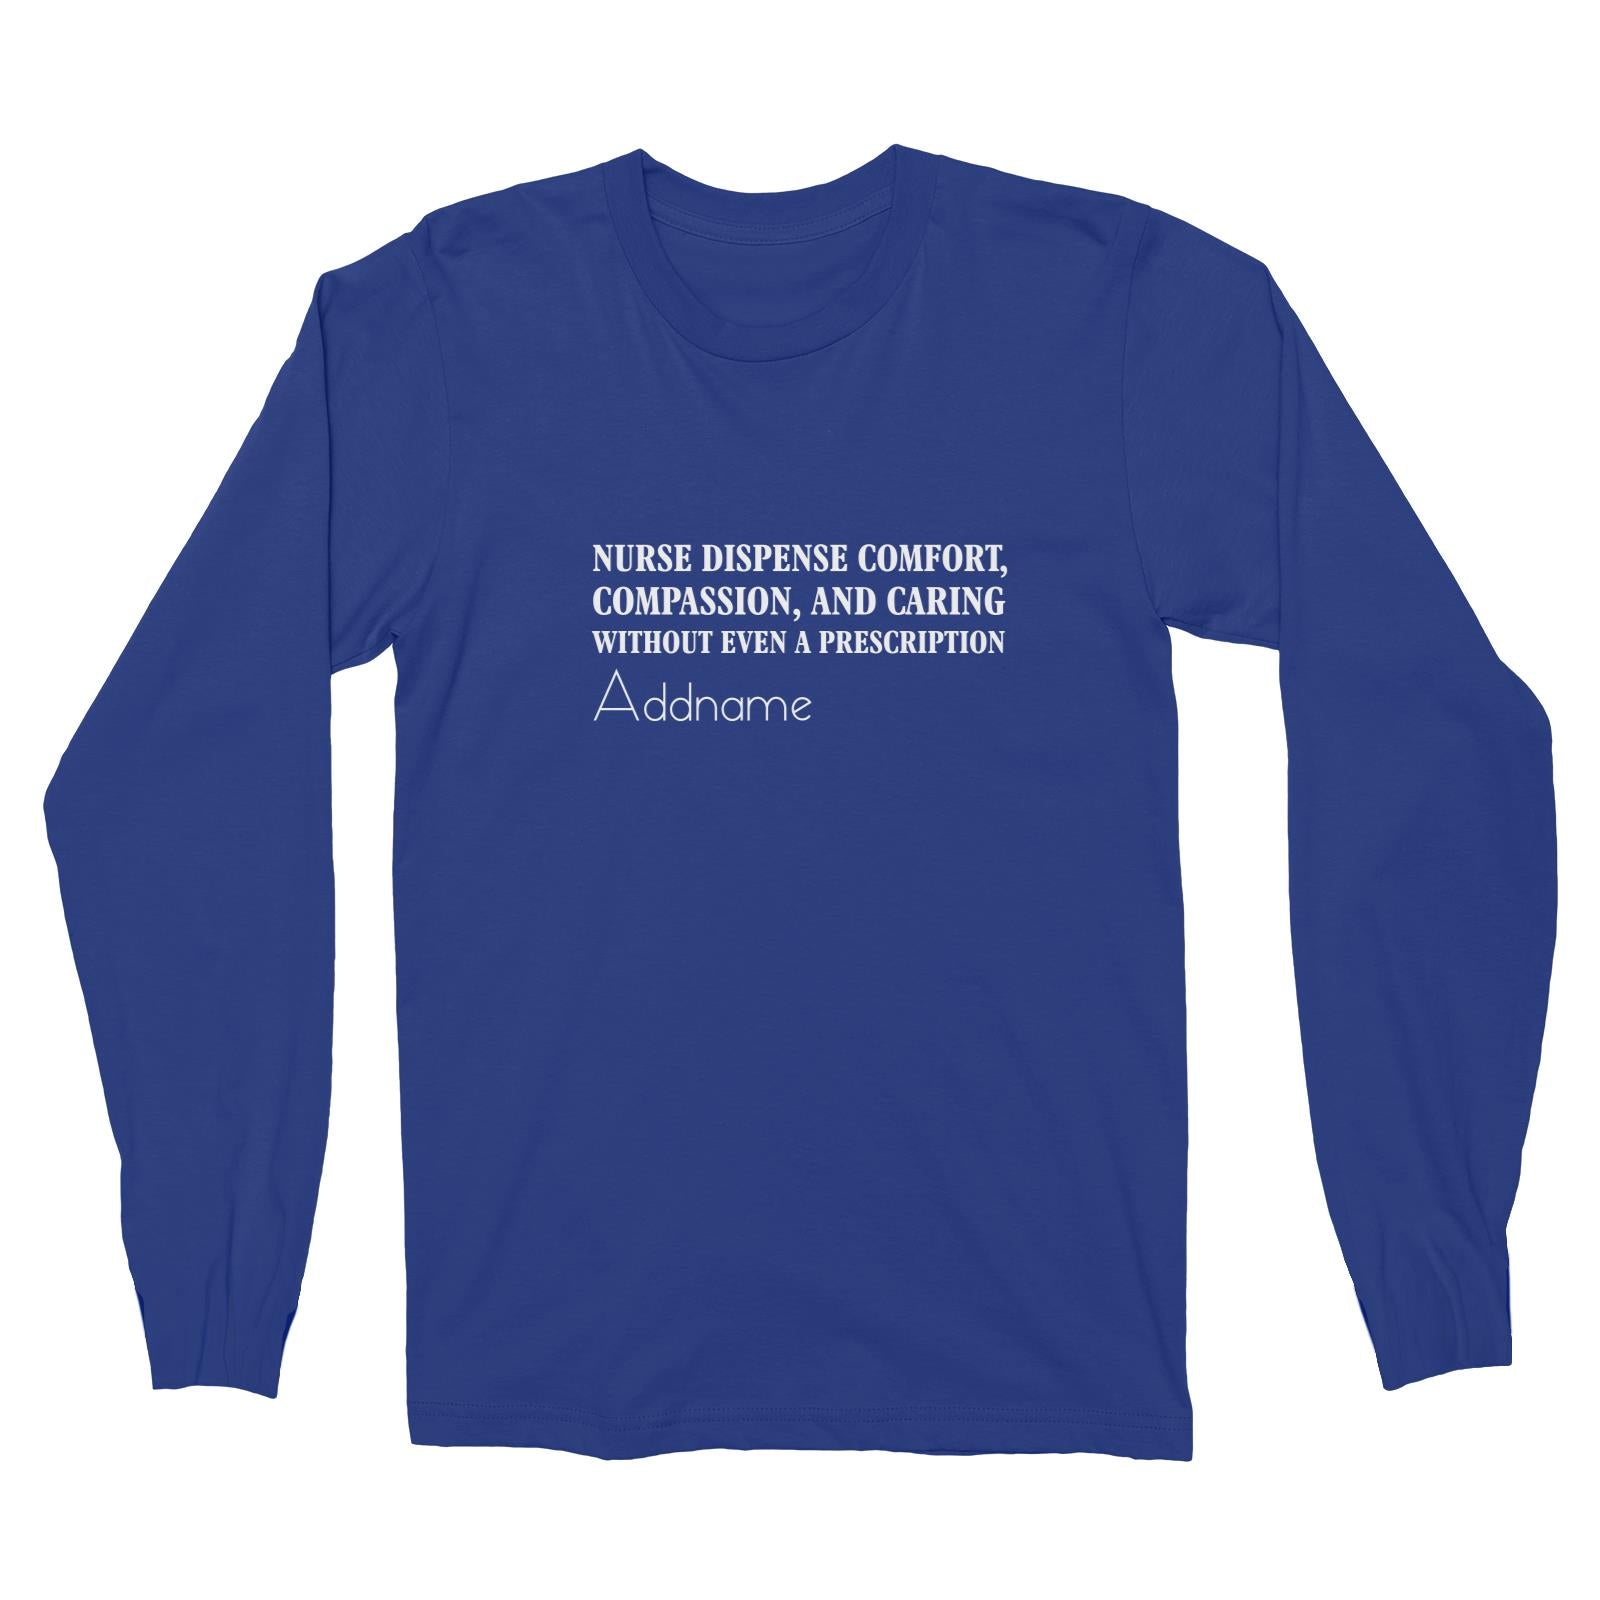 Nurse Dispense Comfort, Compassion, And Caring Without Even A Prescription Long Sleeve Unisex T-Shirt